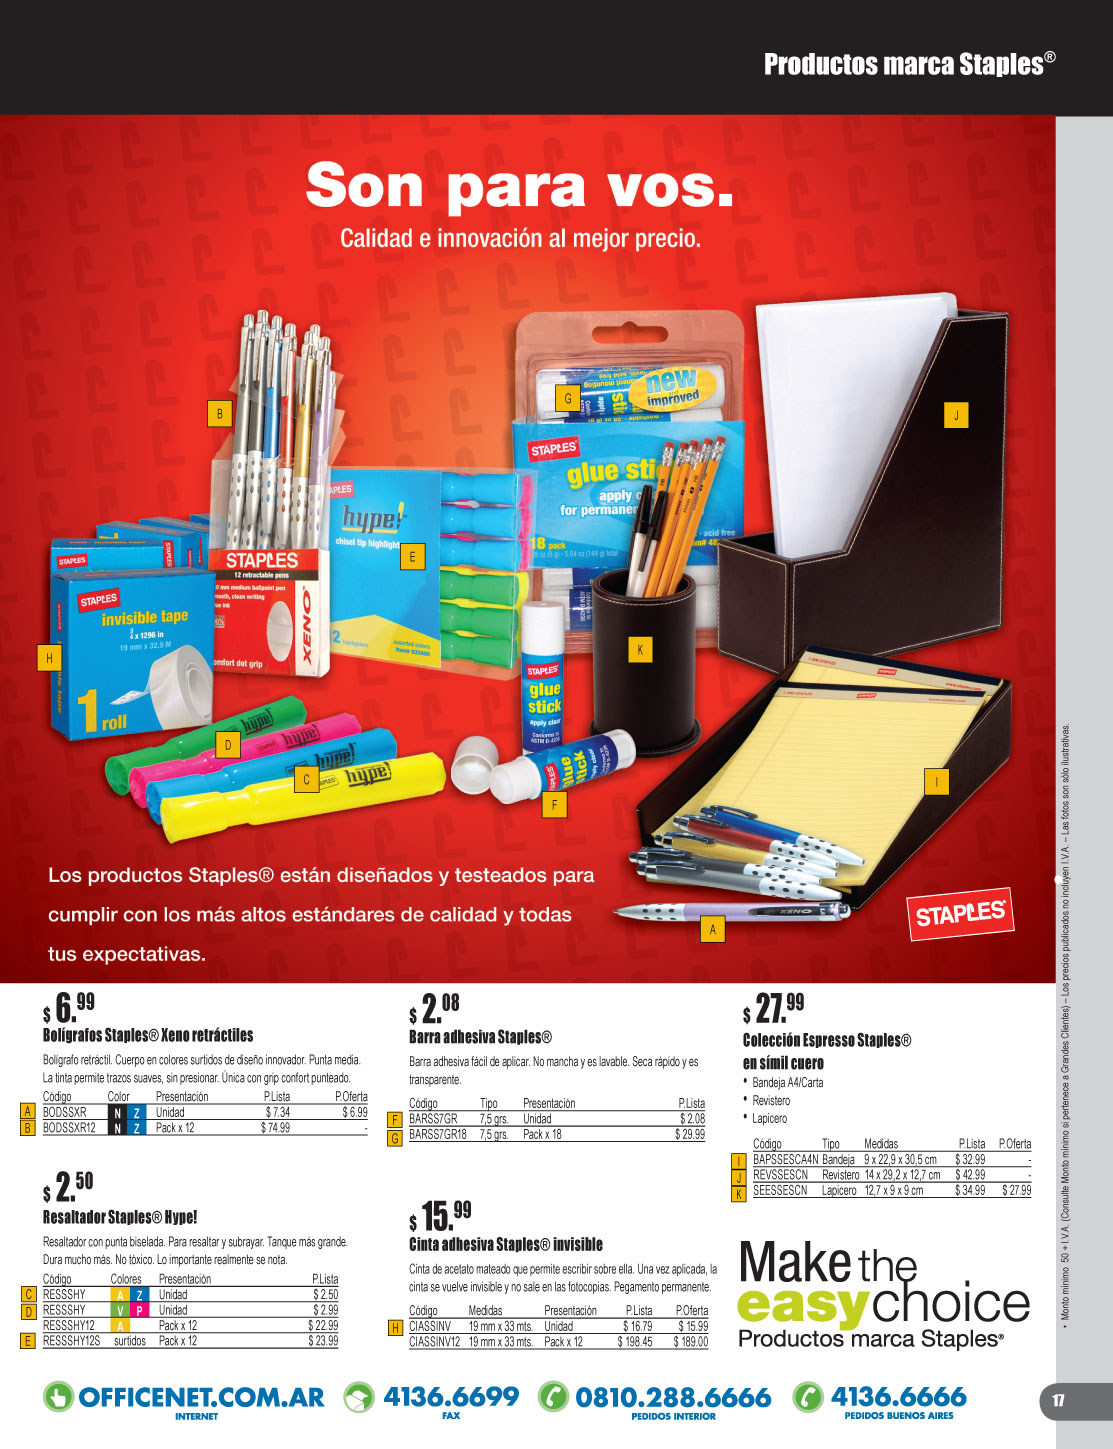 [OS_MAR_Pag17+staples+brand+products.jpg]